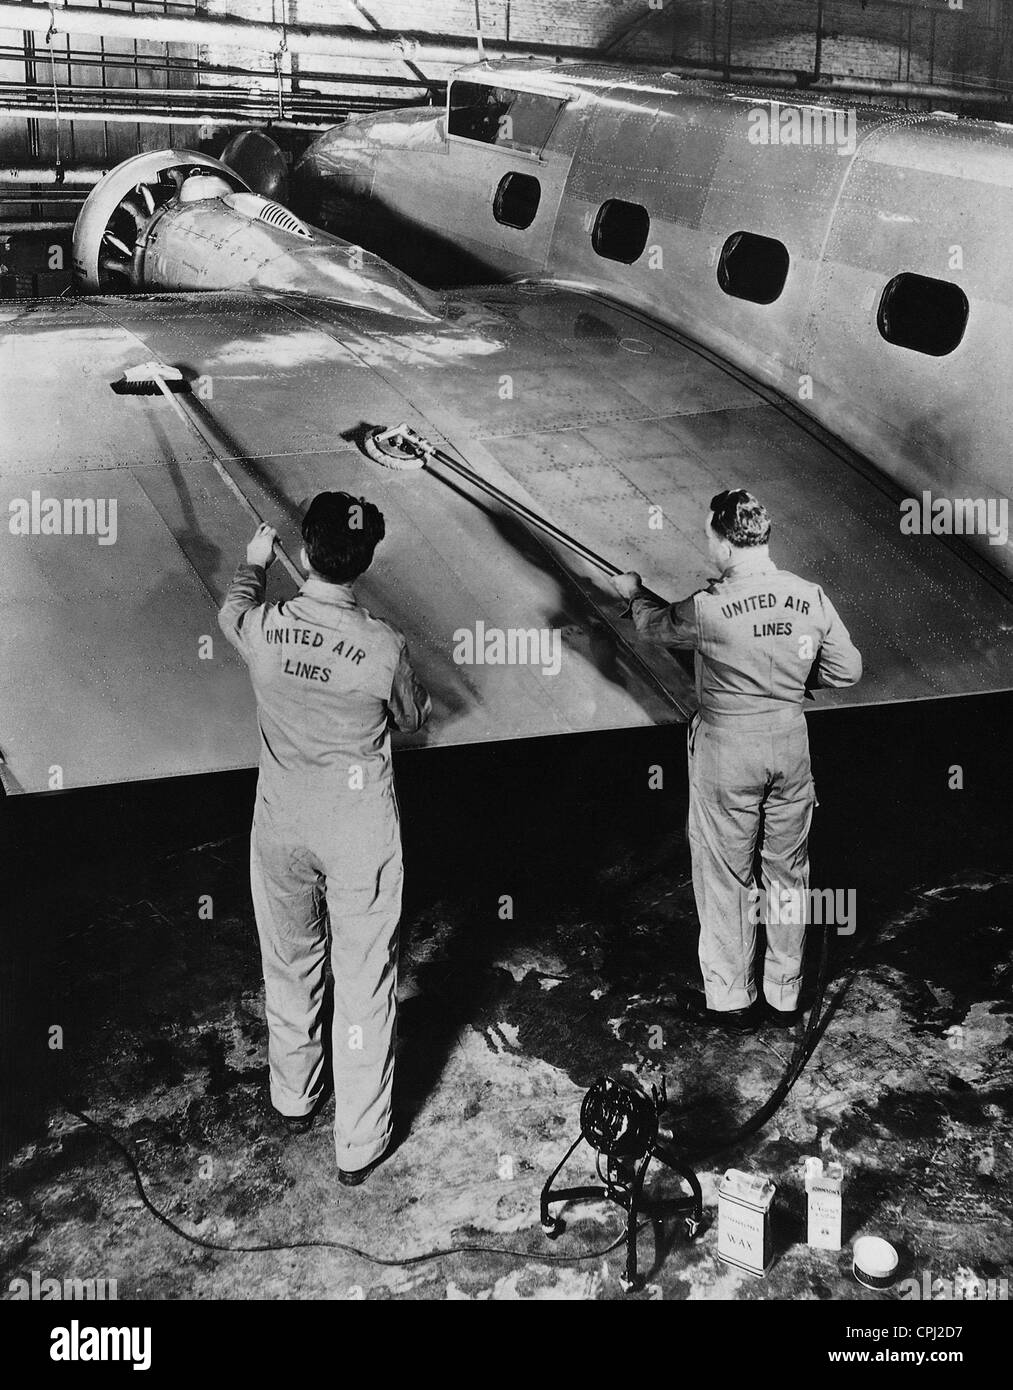 employees of United Airlines wax a passenger plane, 1934 Stock Photo